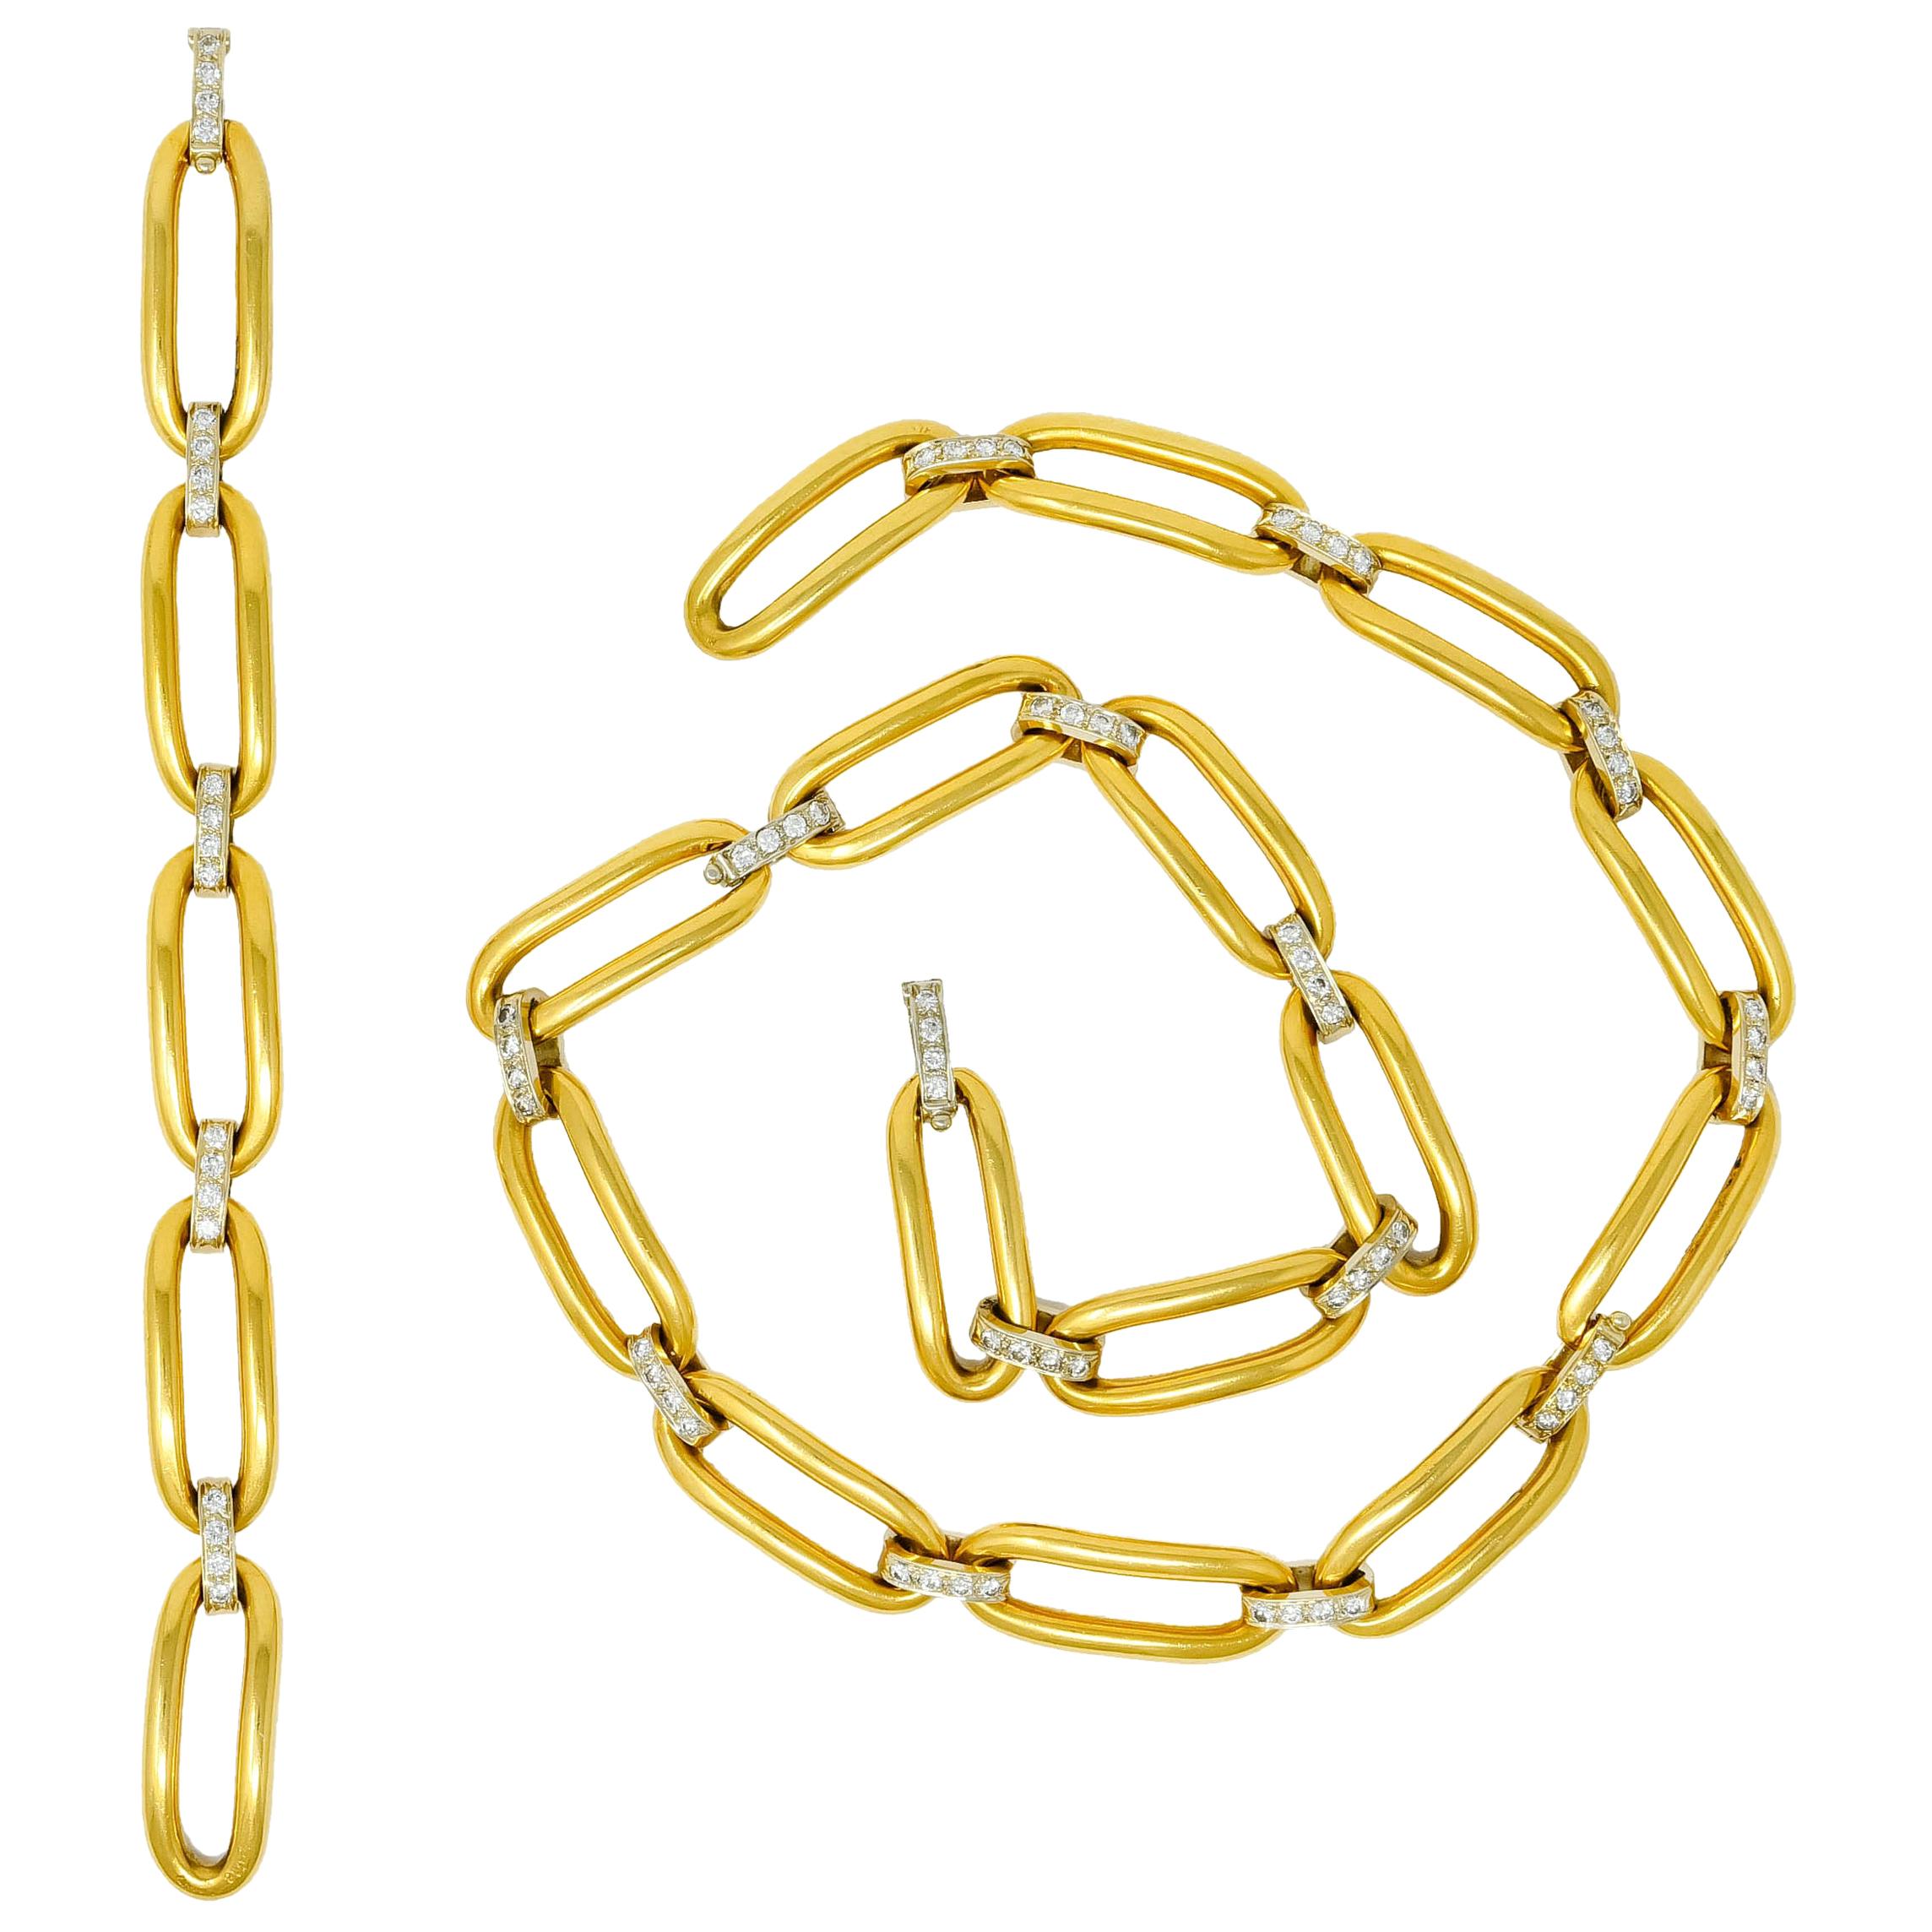 Link style necklace and matching bracelet comprised of large, elongated, yellow gold links alternating with white gold spacer links

Spacer links are bead set with round brilliant cut diamonds weighing approximately 4.56 carats, F/G color and VS